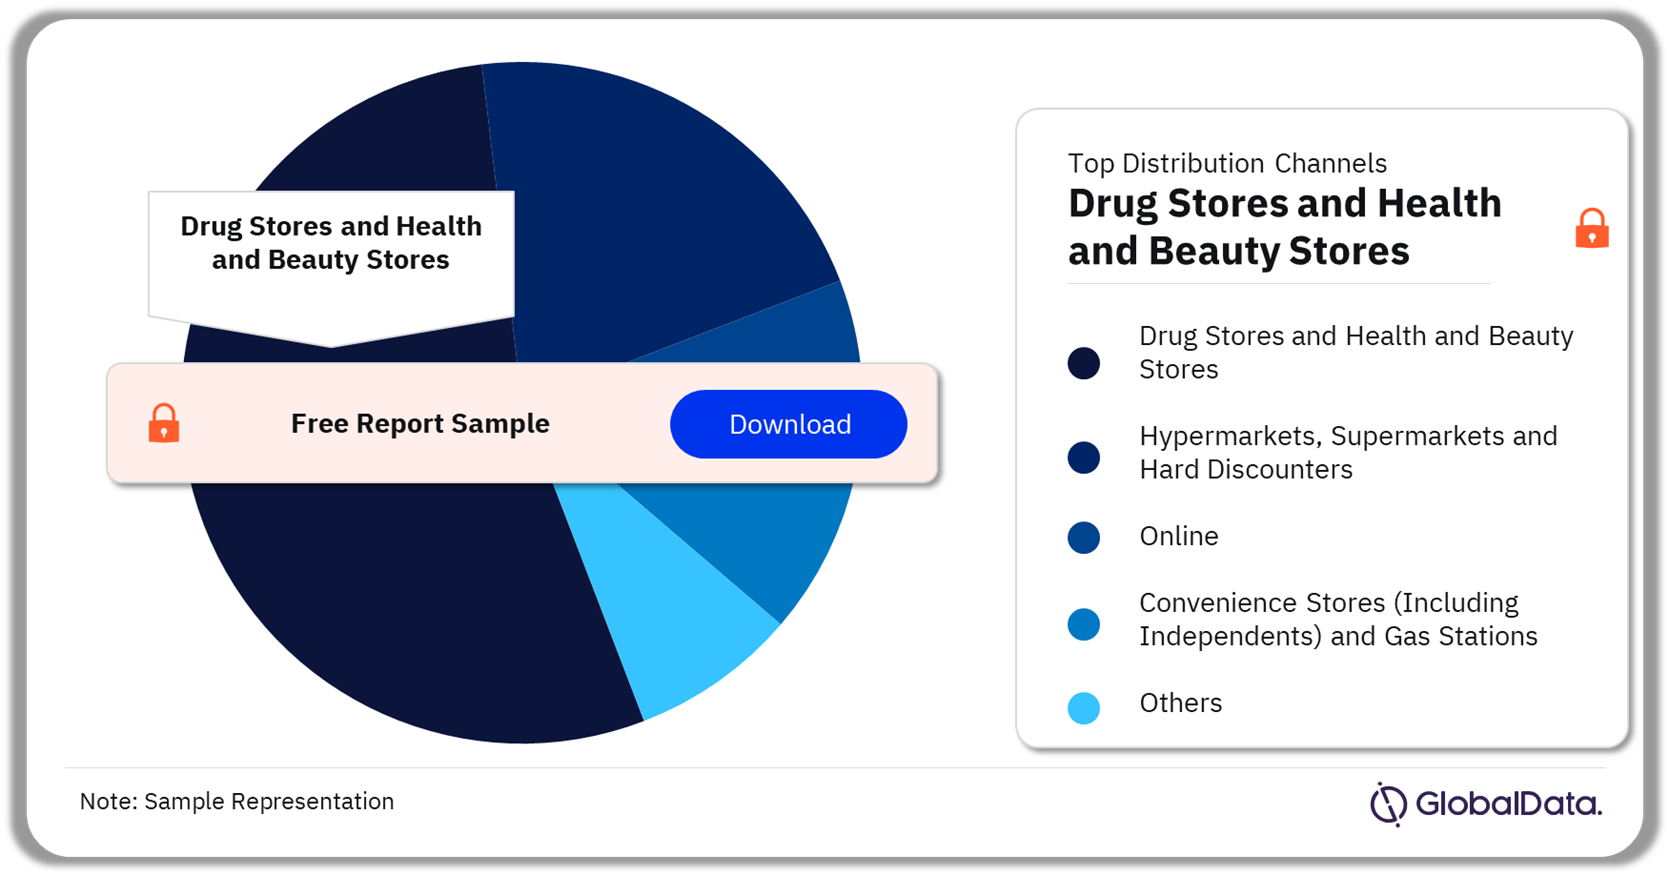 MEA Health and Beauty Sector Analysis by Distribution Channel, 2022 (%)